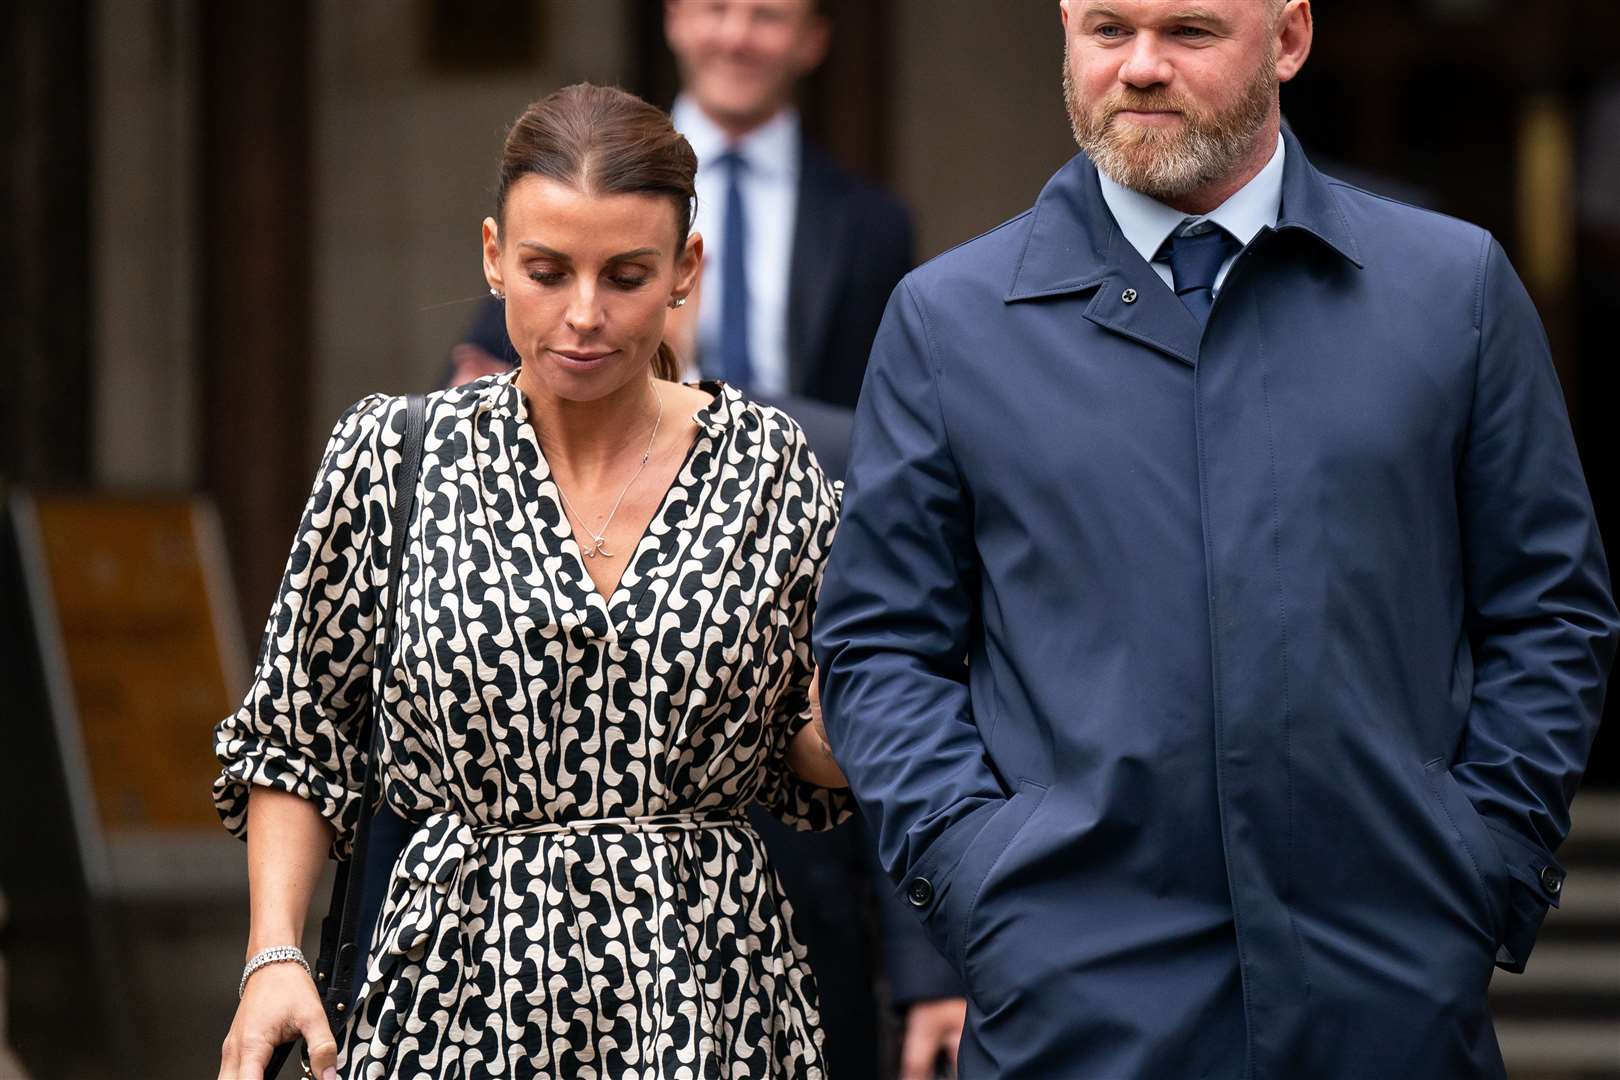 Coleen and Wayne Rooney exit the Royal Courts Of Justice in London after Wednesday’s hearing (Aaron Chown/PA)